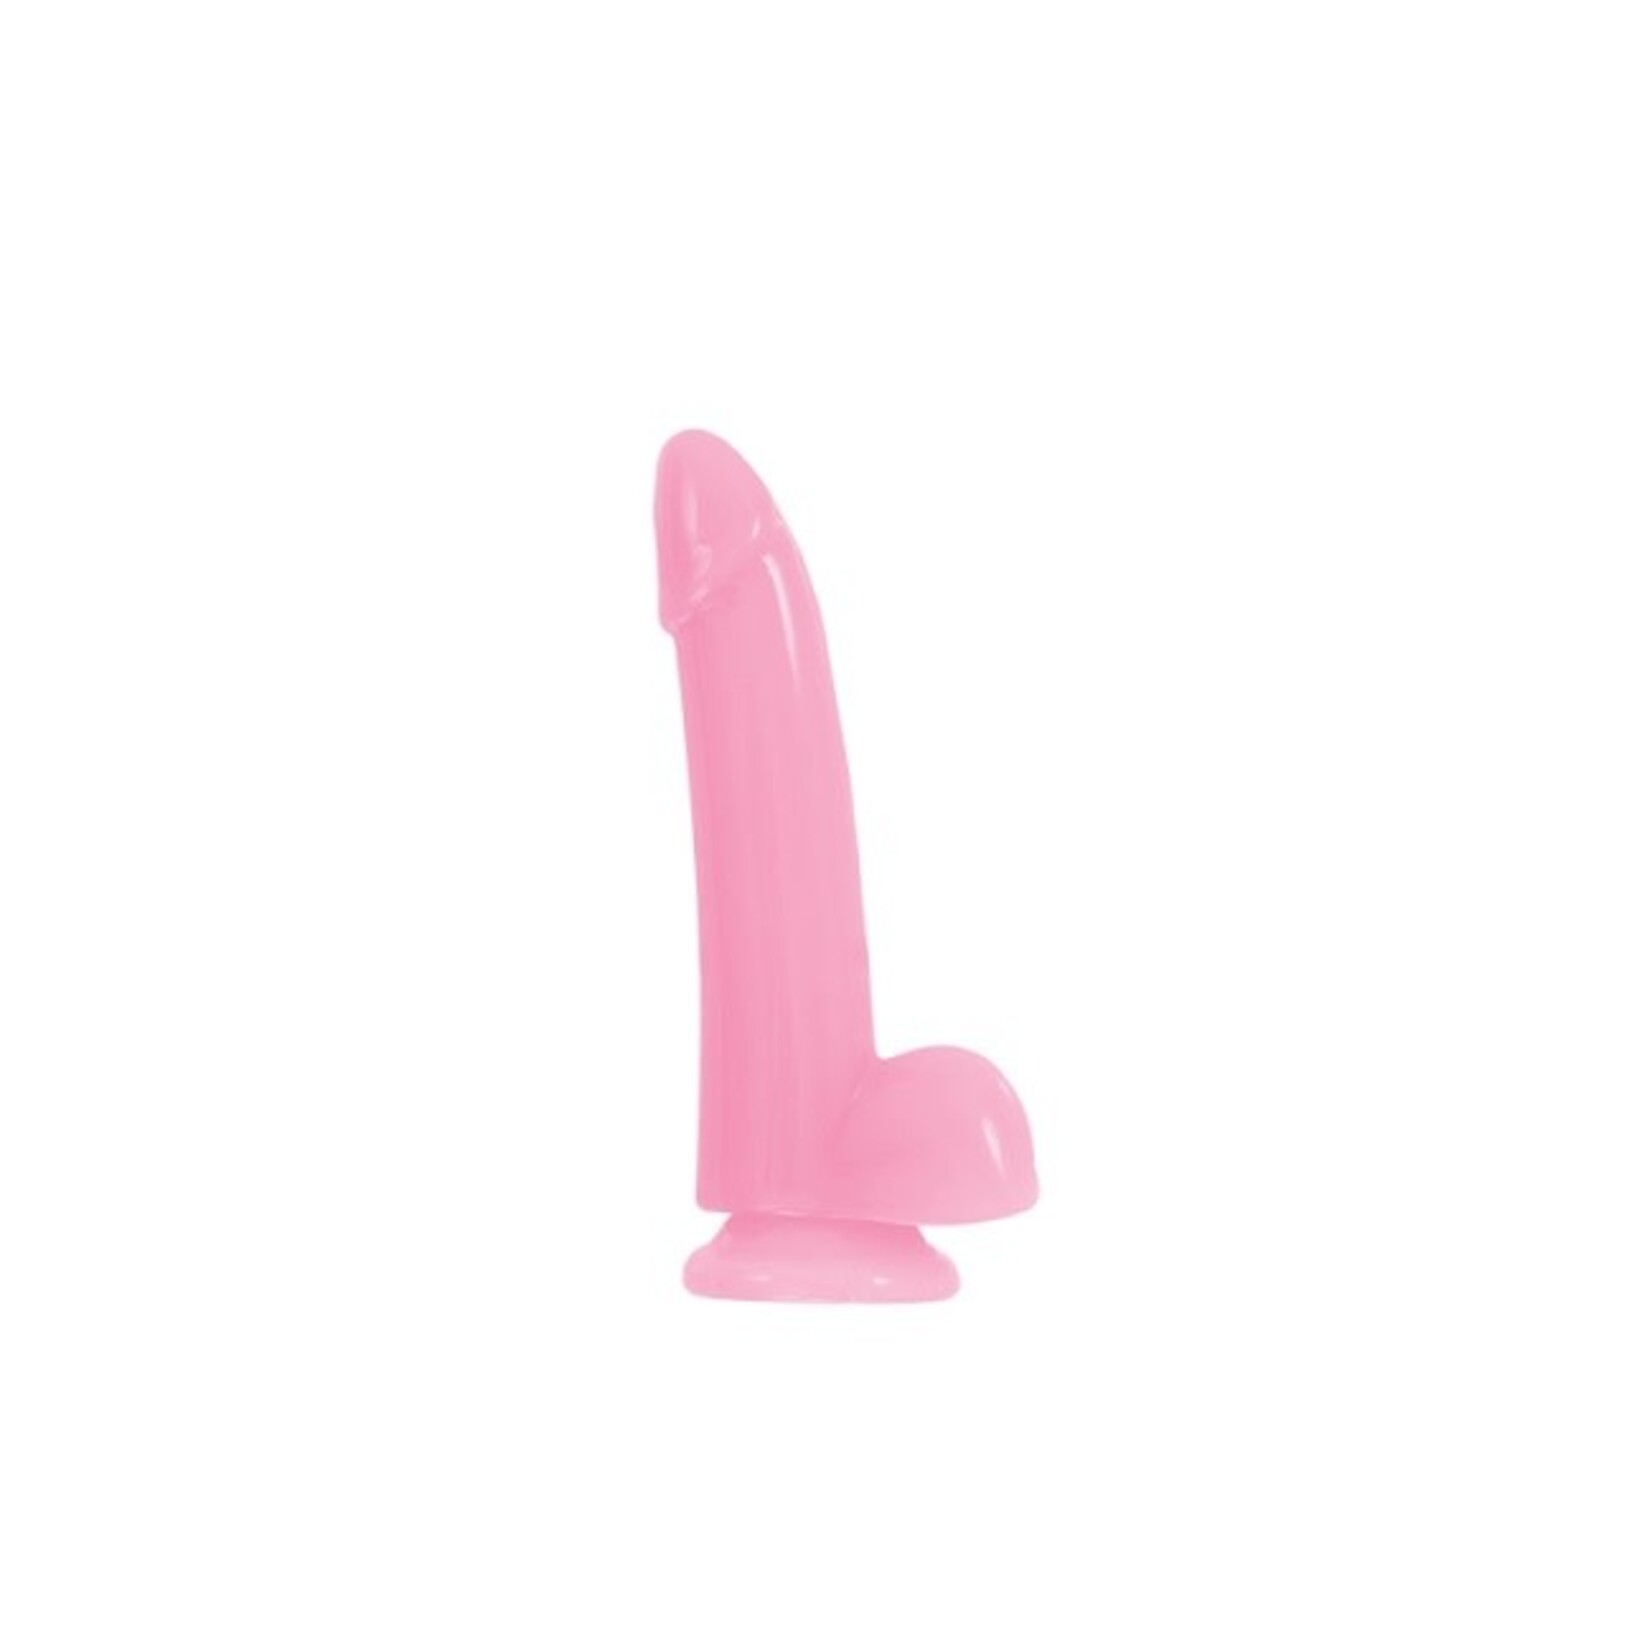 NS Novelties Firefly Smooth Dong 5"